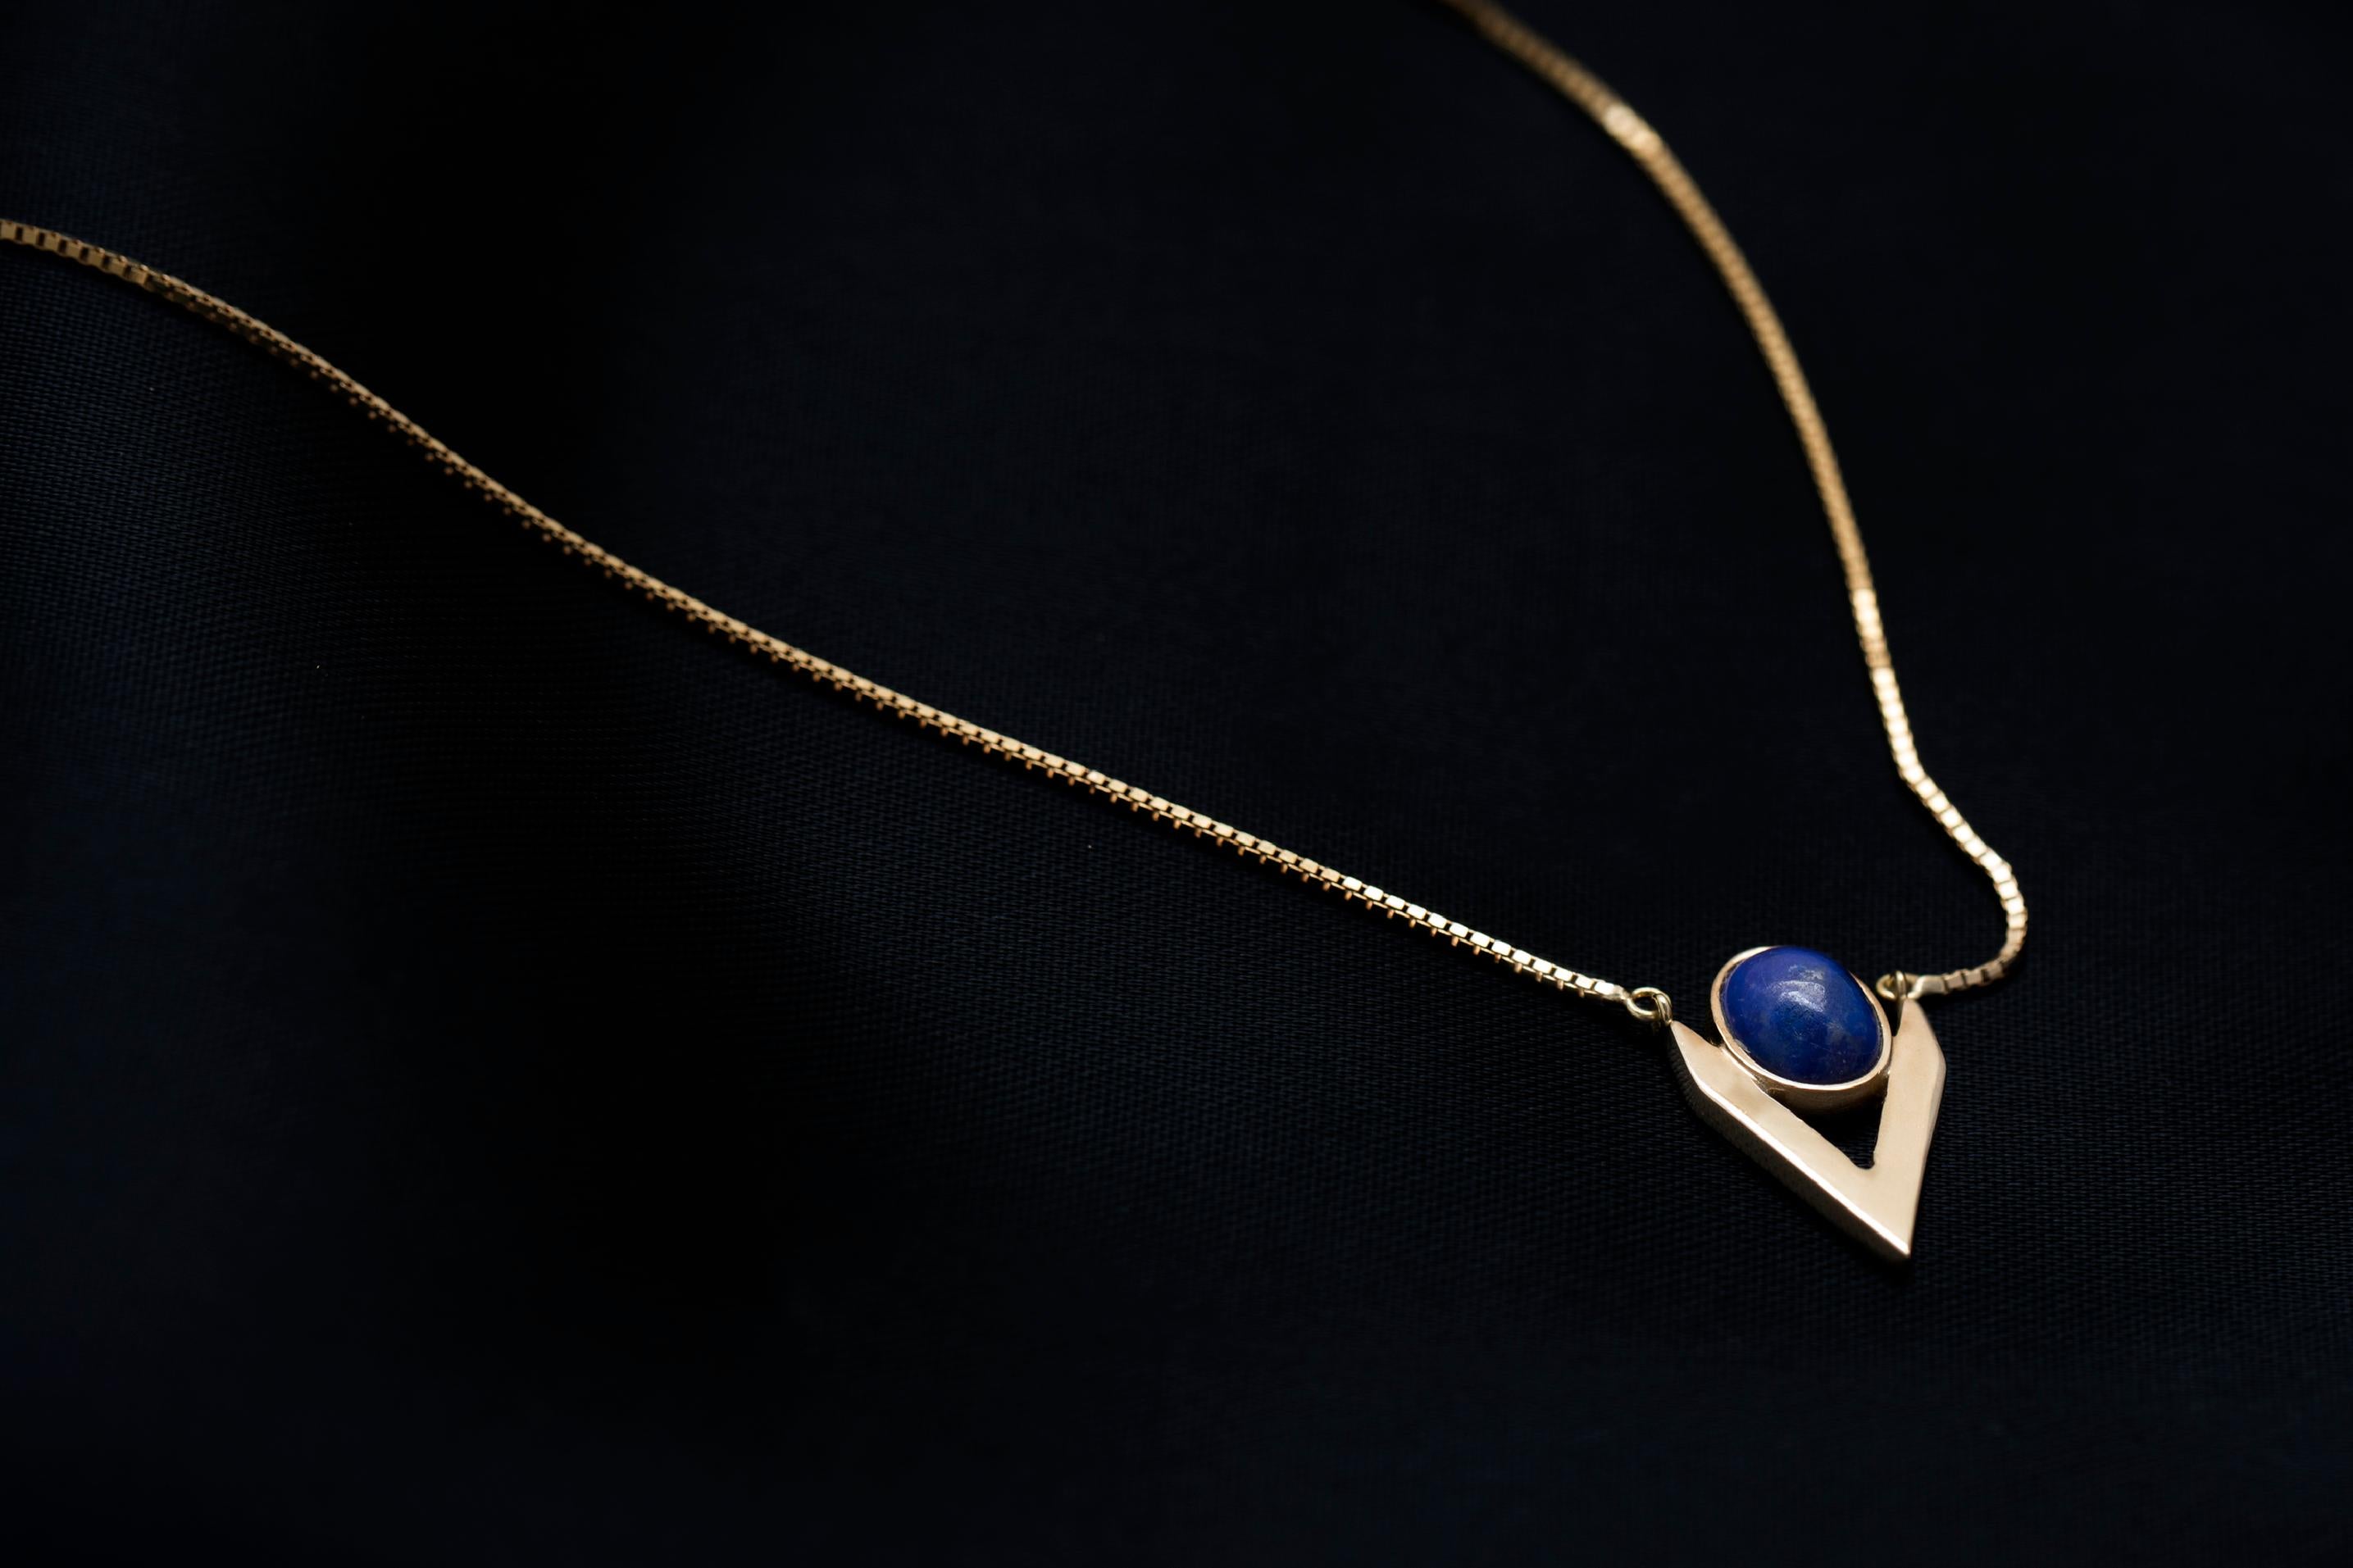 Contemporary Necklace in 9 Carat Gold and Lapis Lazuli Cabochon from Iosselliani For Sale